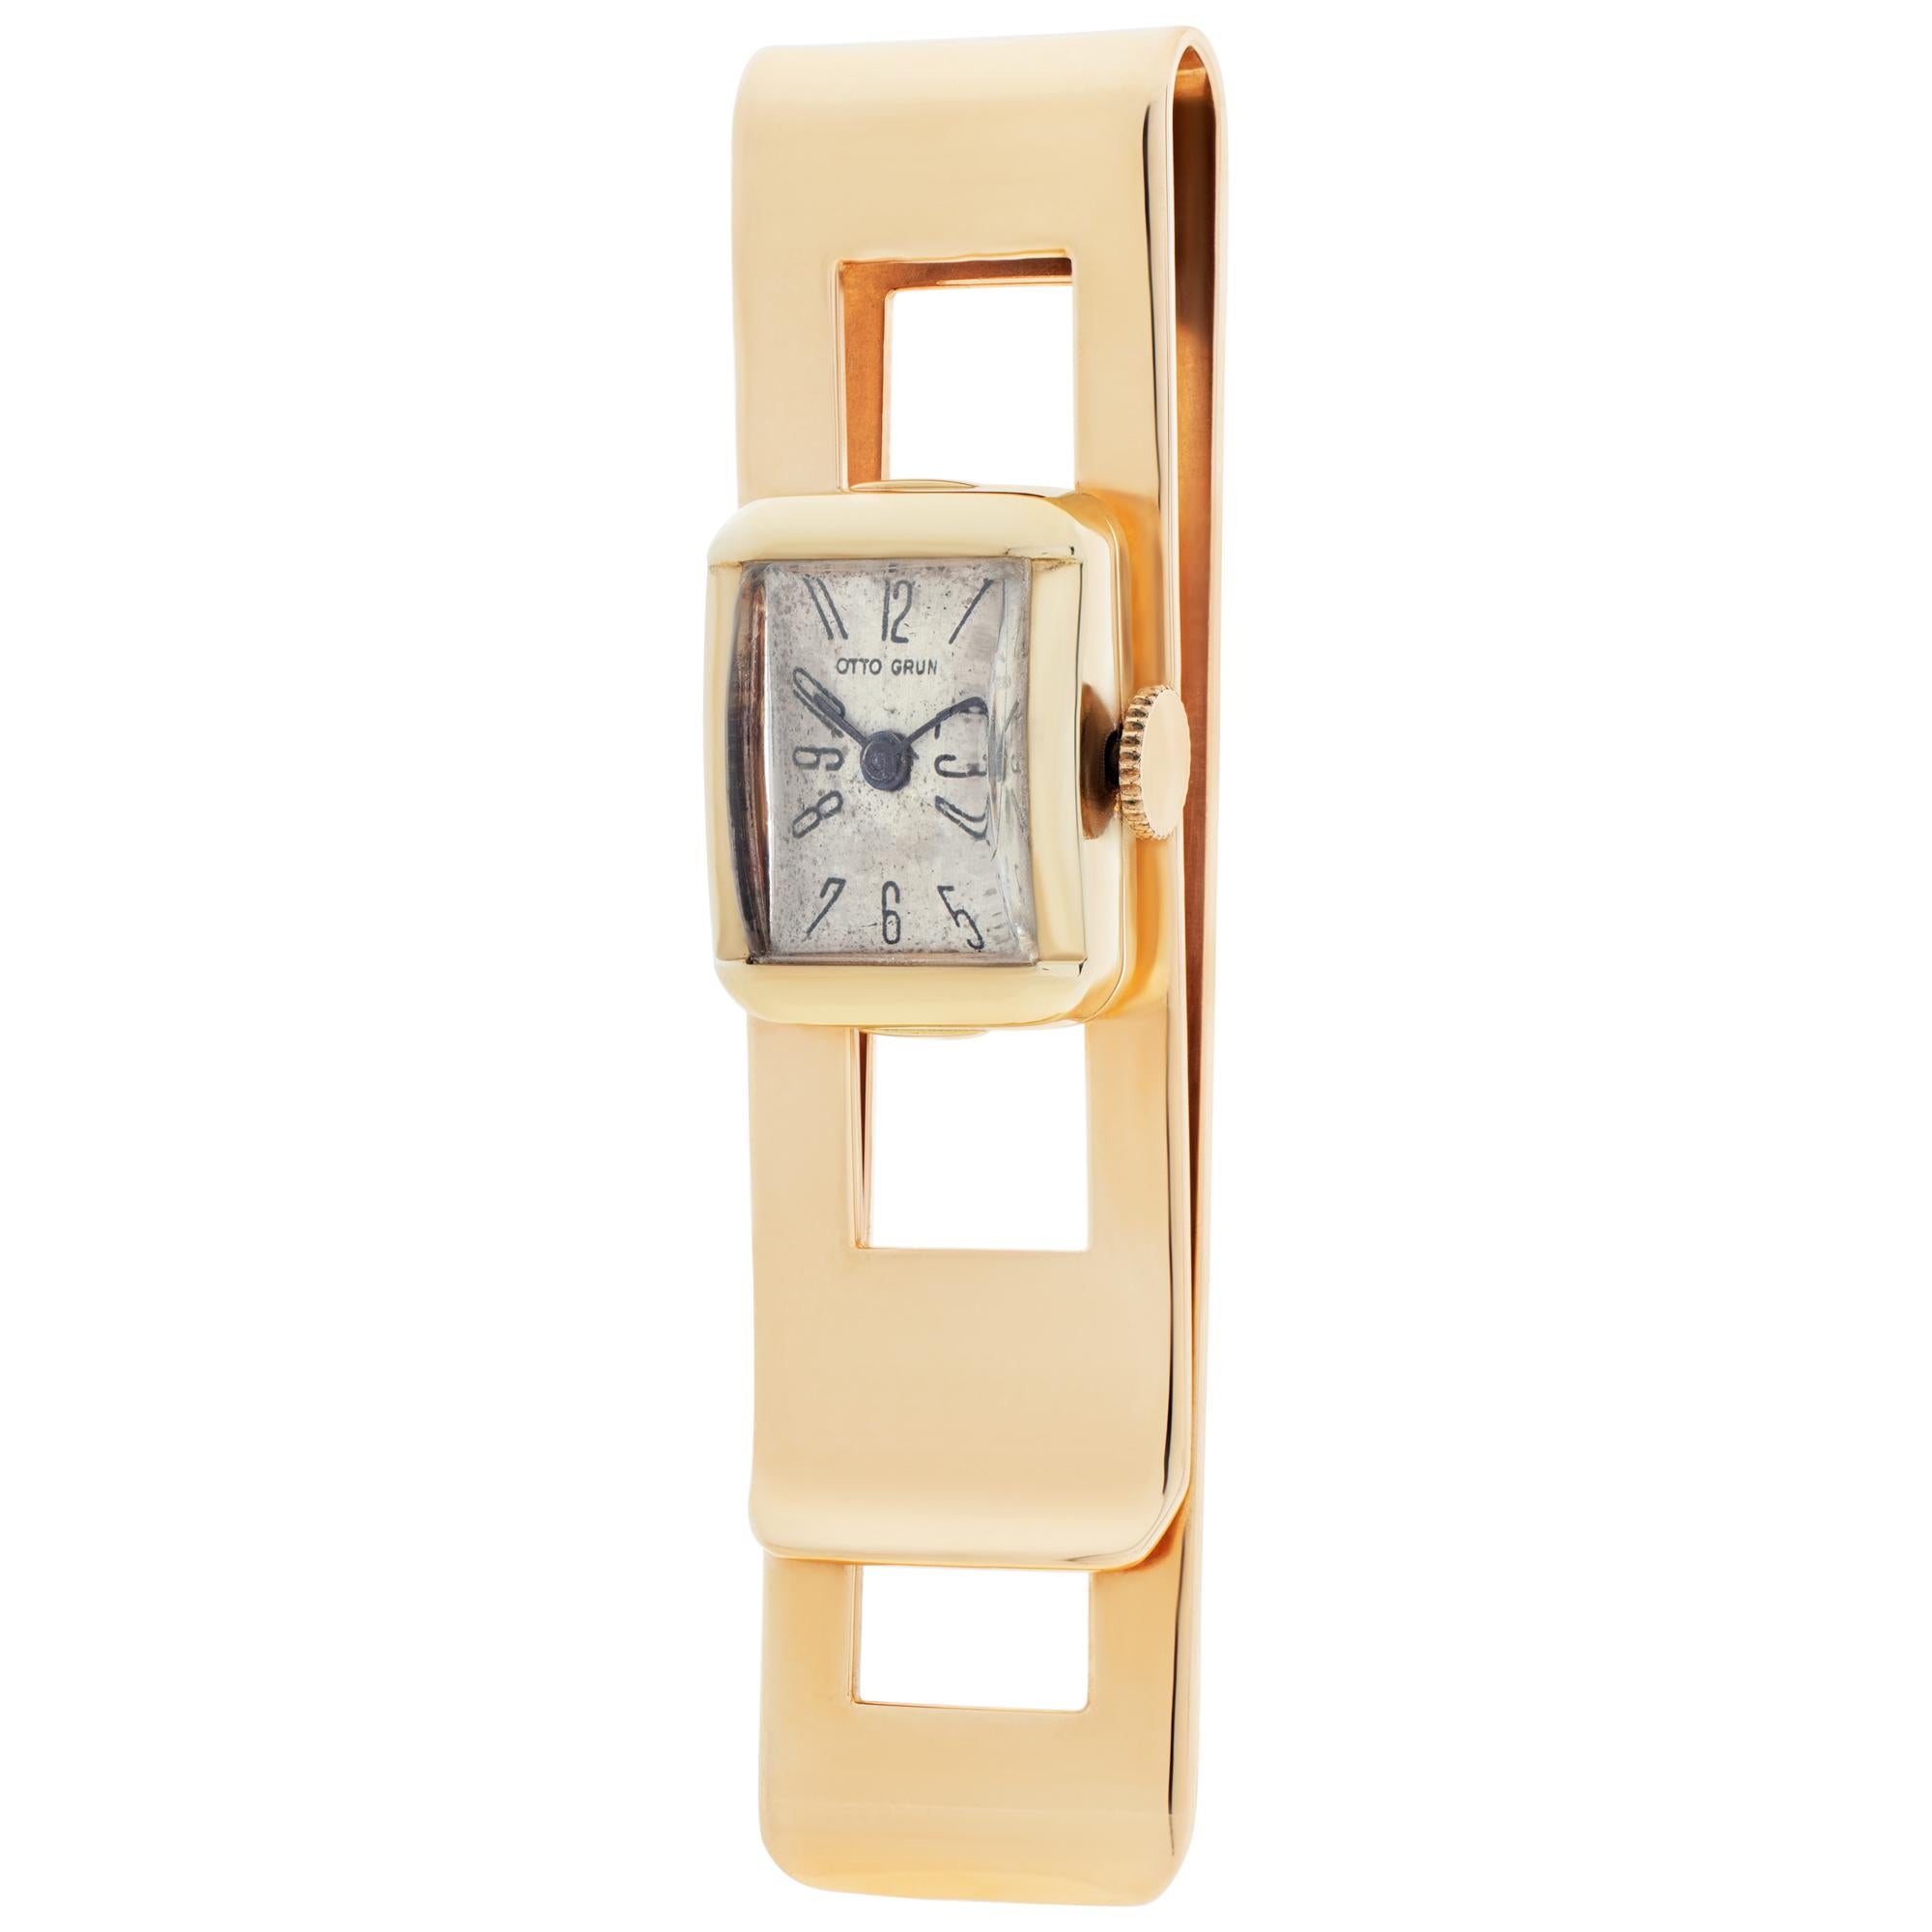 Money Clip in 14k yellow gold with Otto Grun watch. Measures 2.45'' x 0.6''.
